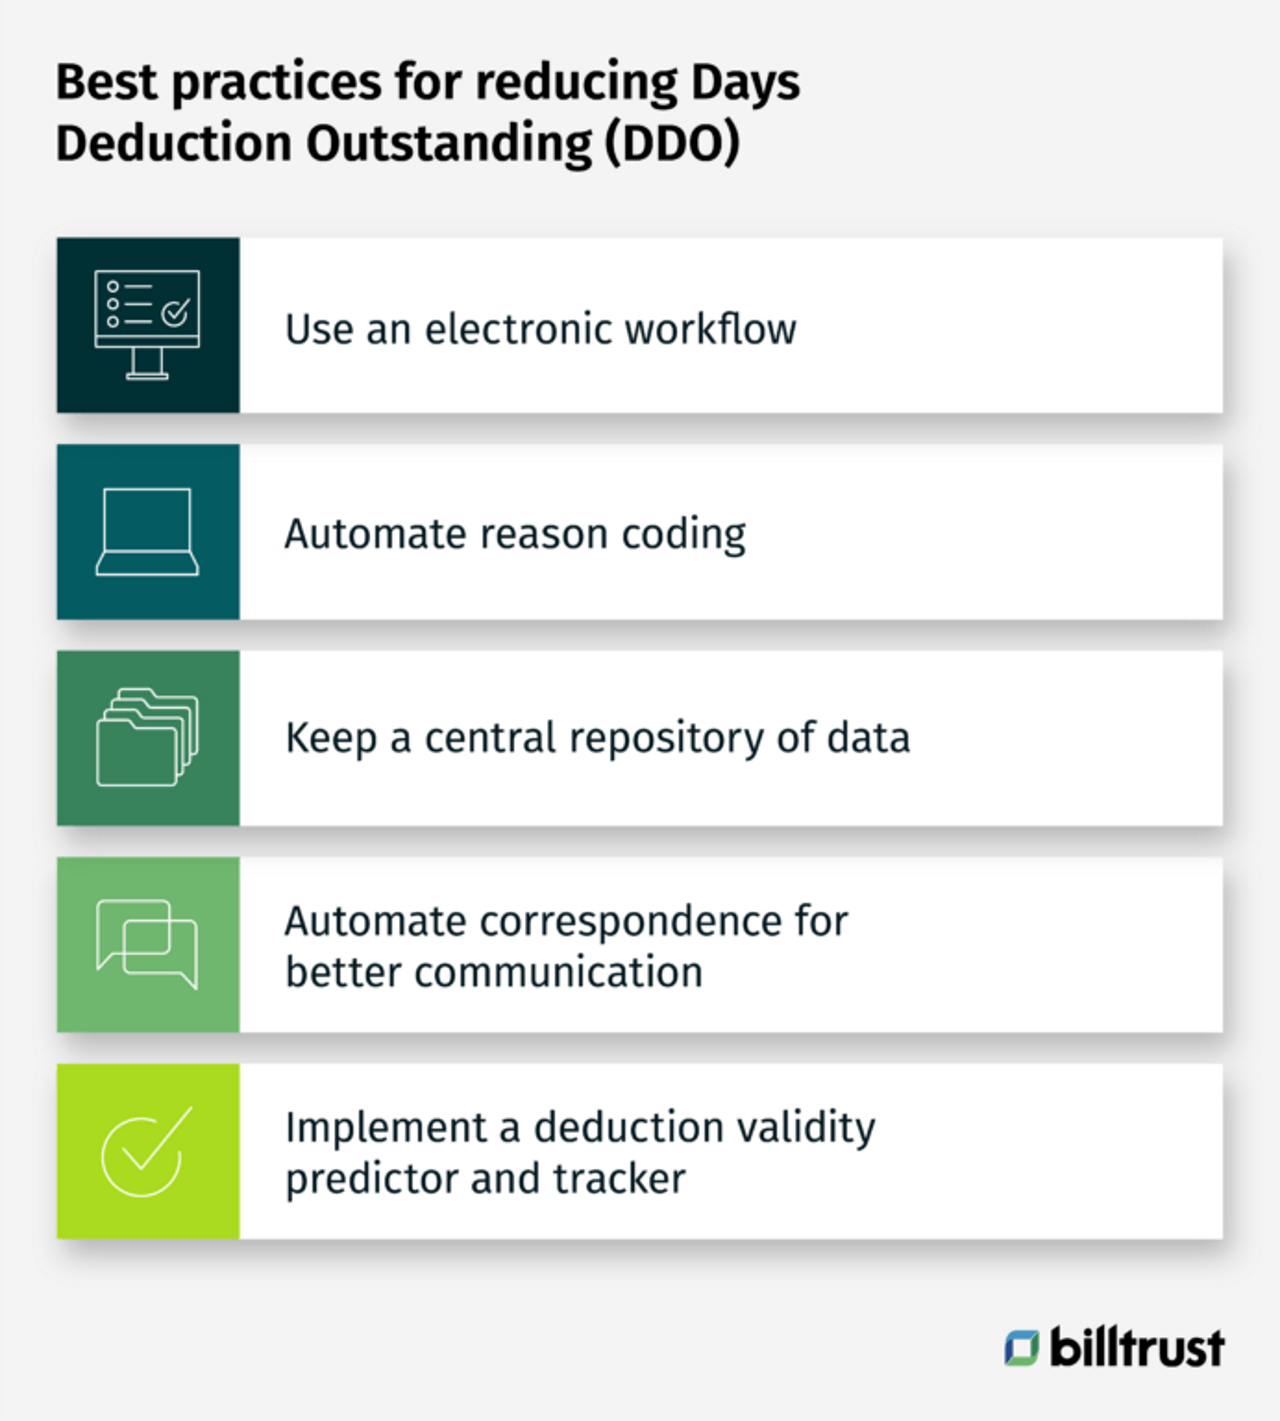 best practices for reducing days deduction outstanding DDO